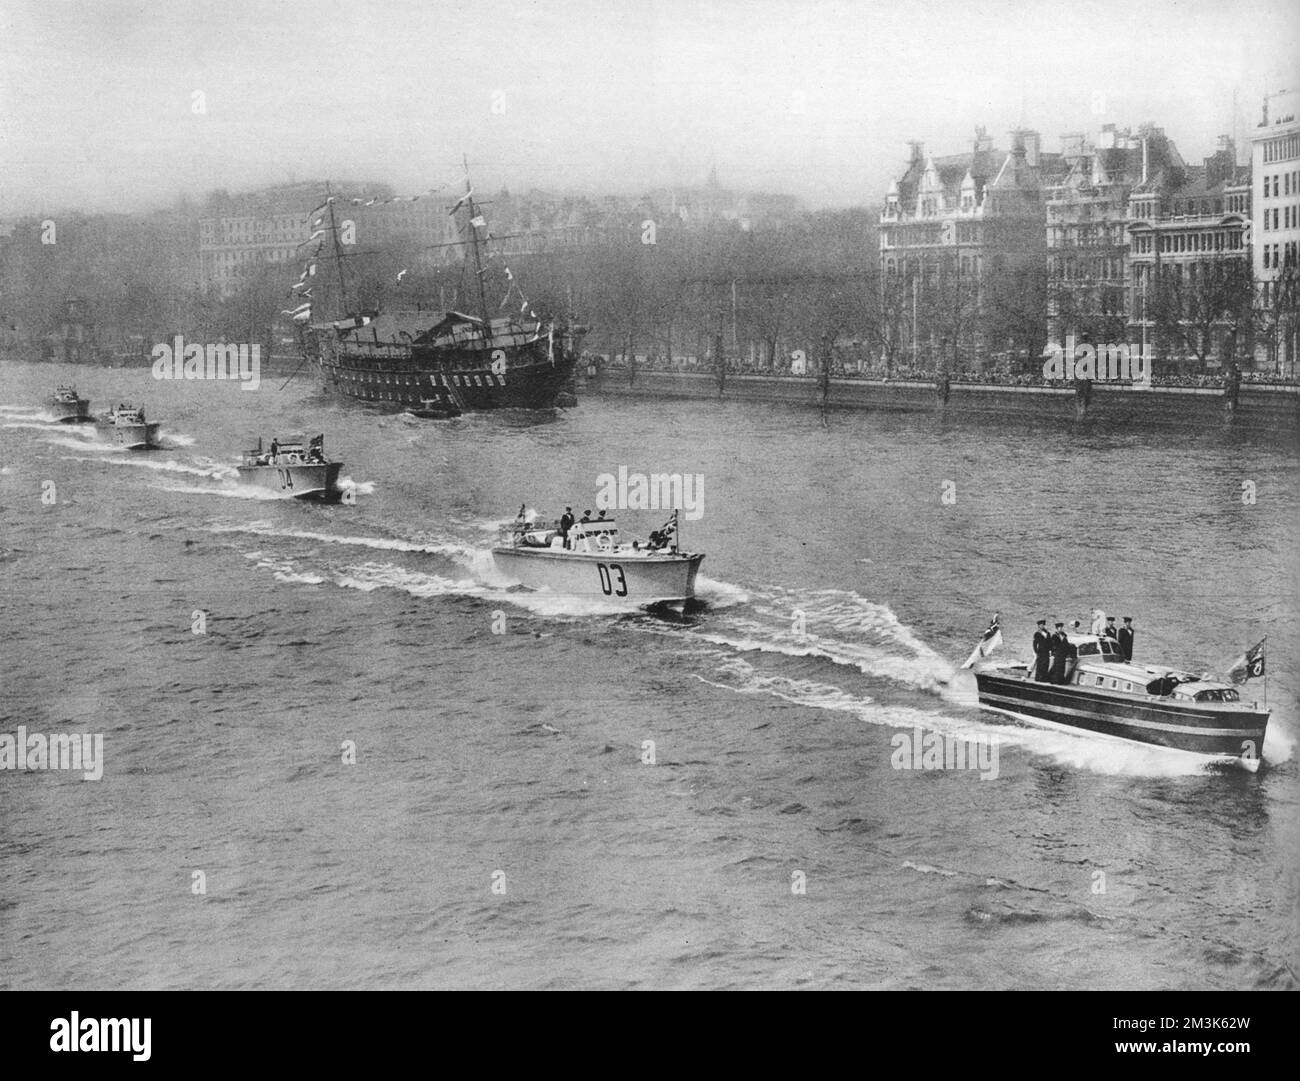 Royal motor barge leading four motor torpedo boats down the River Thames, near Blackfriars, London, 1937.   King George VI, with Queen Elizabeth and Queen Mary, was travelling on board the barge to Greenwich, to open the National Maritime Museum.  The Training Ship 'President' is visible, left background, moored off the embankment.  1937 Stock Photo